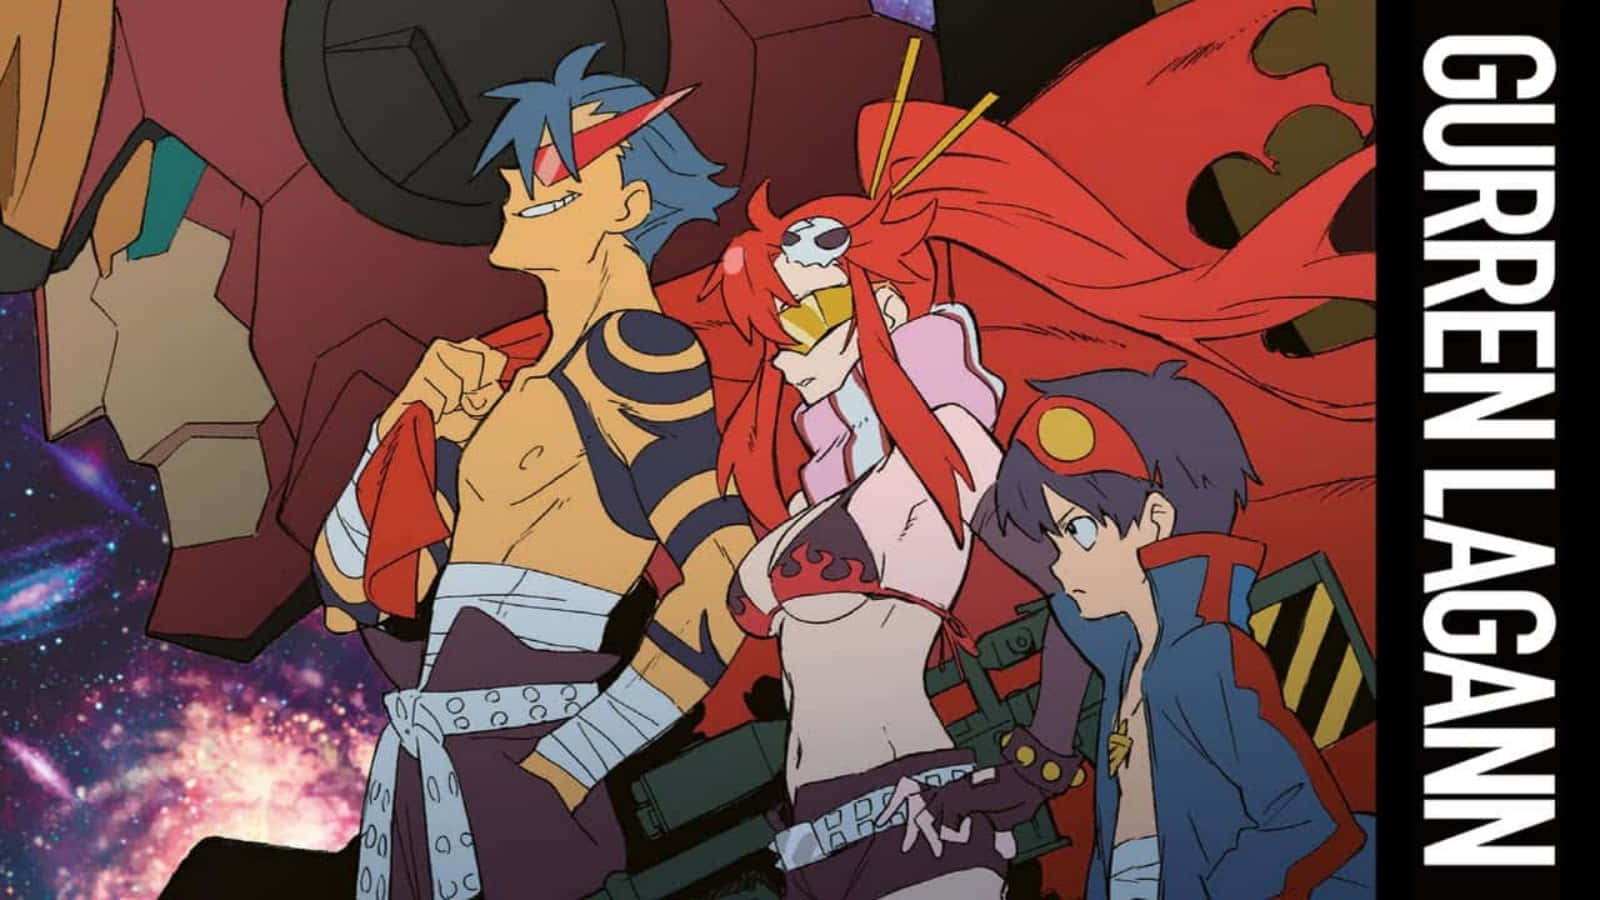 Harness the power of the spiral with Gurren Lagann!